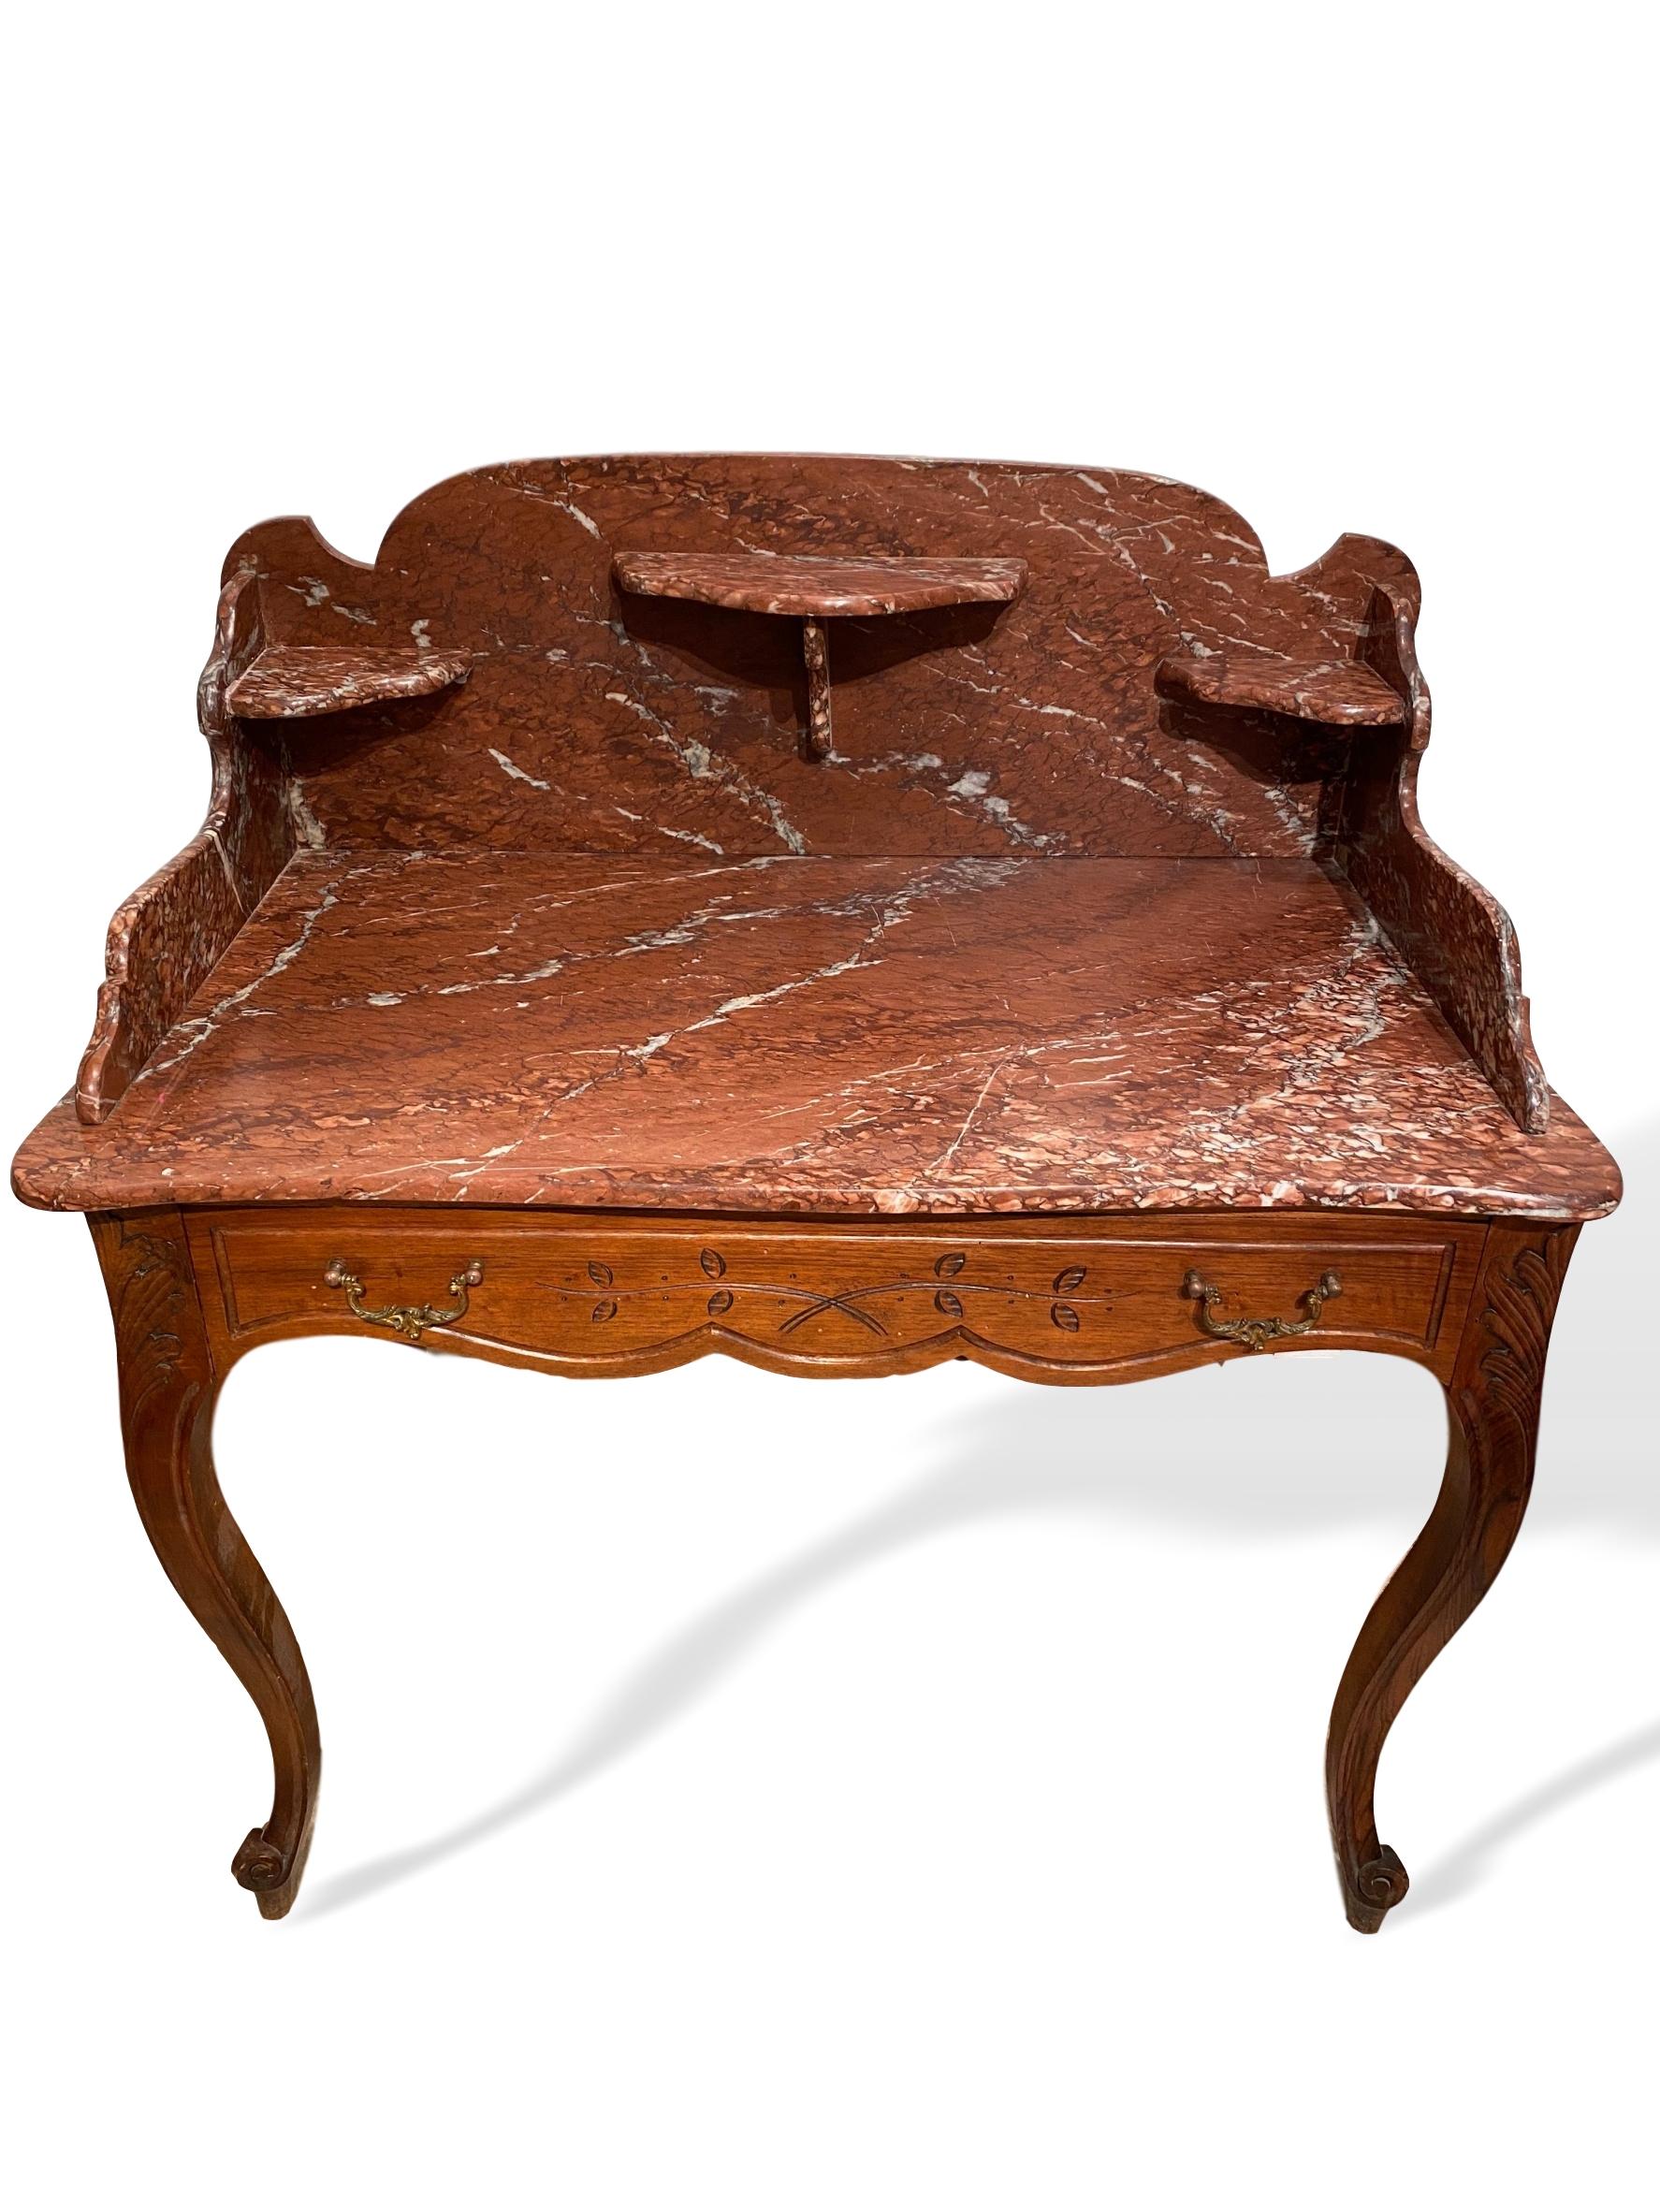 Marble-top washstand dry sink with marble surround and shelves, French, circa 1880, the stand in cherry, with a hand carved and shaped single drawer, with gilded bronze pulls, on curved French legs and whorl feet. 

Measures: 43.25